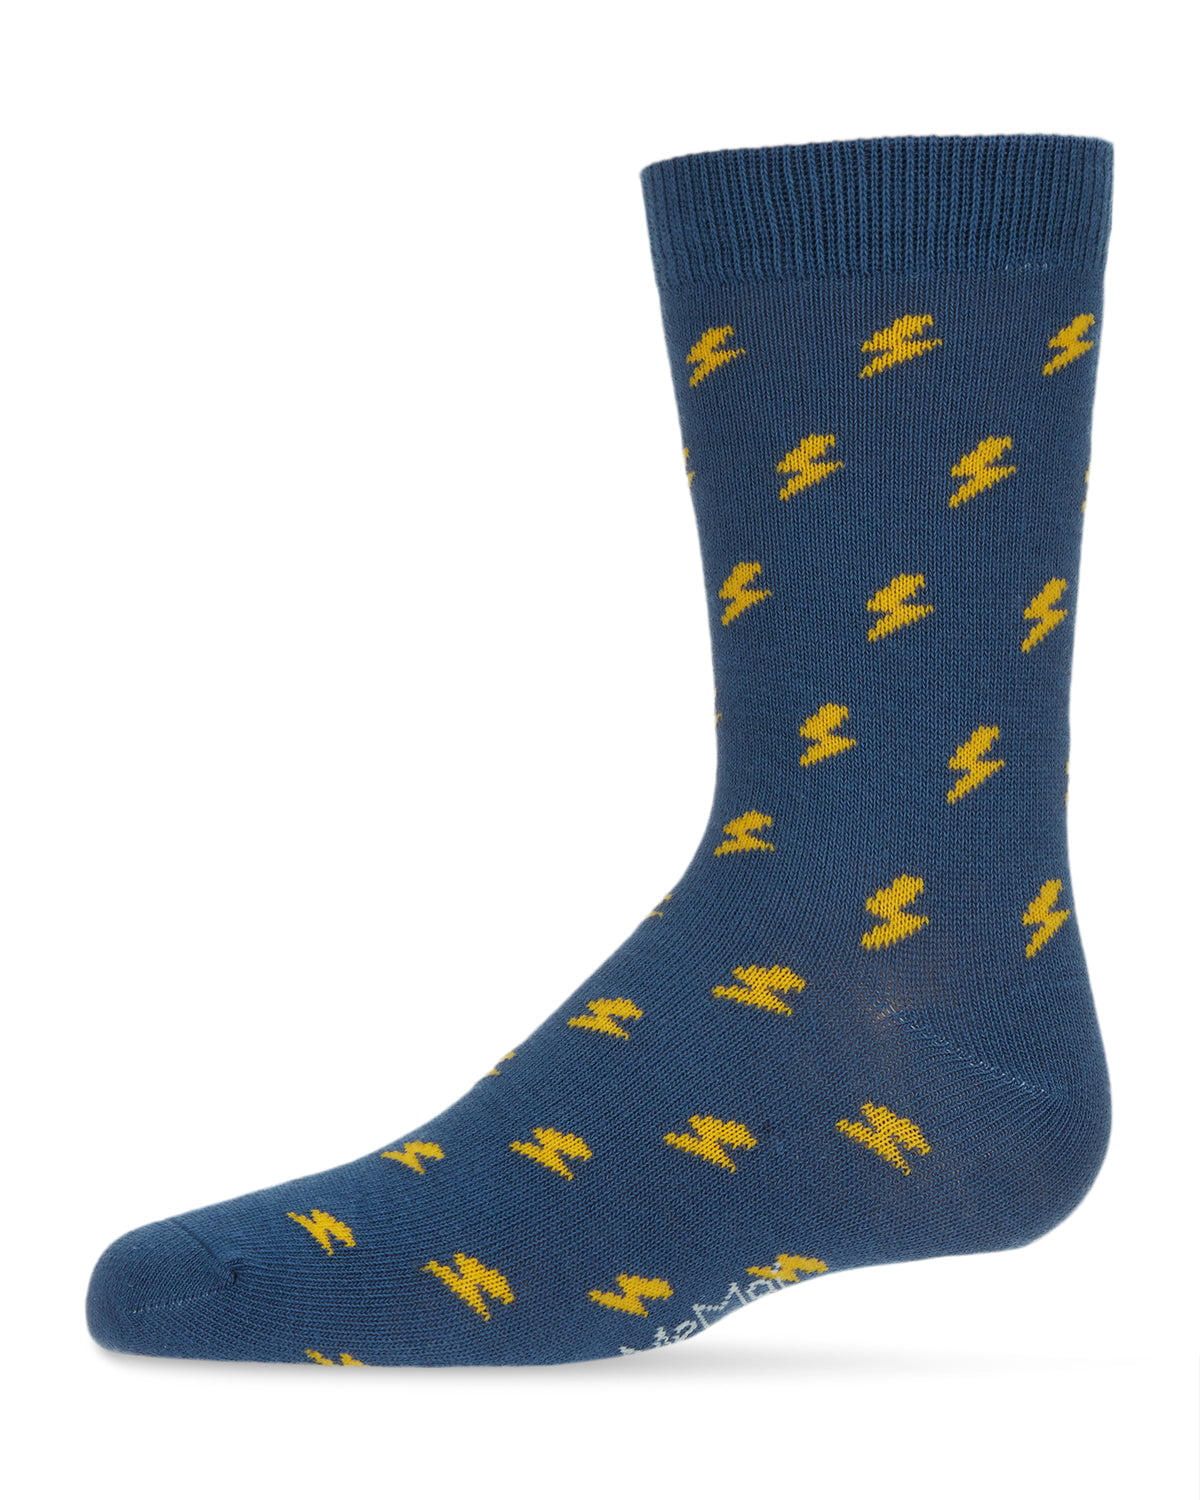 ATHLETIC SOCKS UNISEX HAPPY SOCKS YOUR CHOICE- LIGHTENING BOLTS OR DOTS 